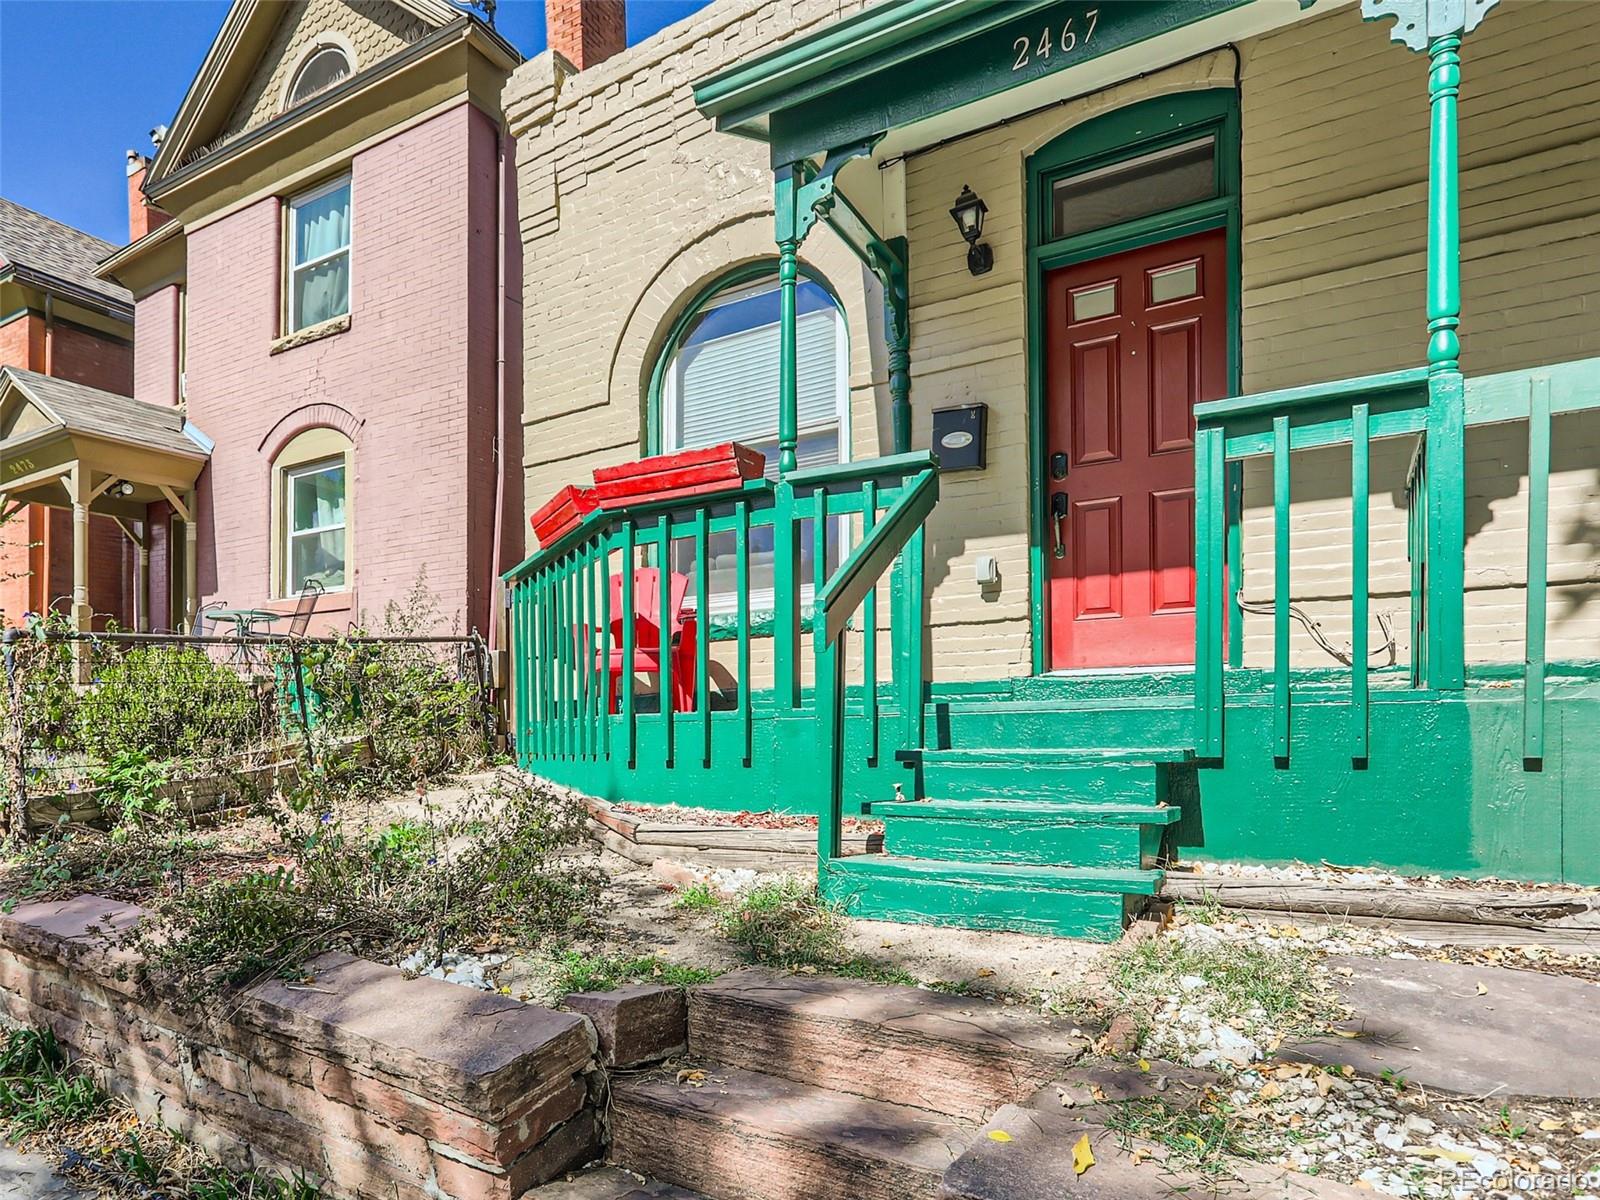 2467 w argyle place, denver sold home. Closed on 2024-03-14 for $420,000.